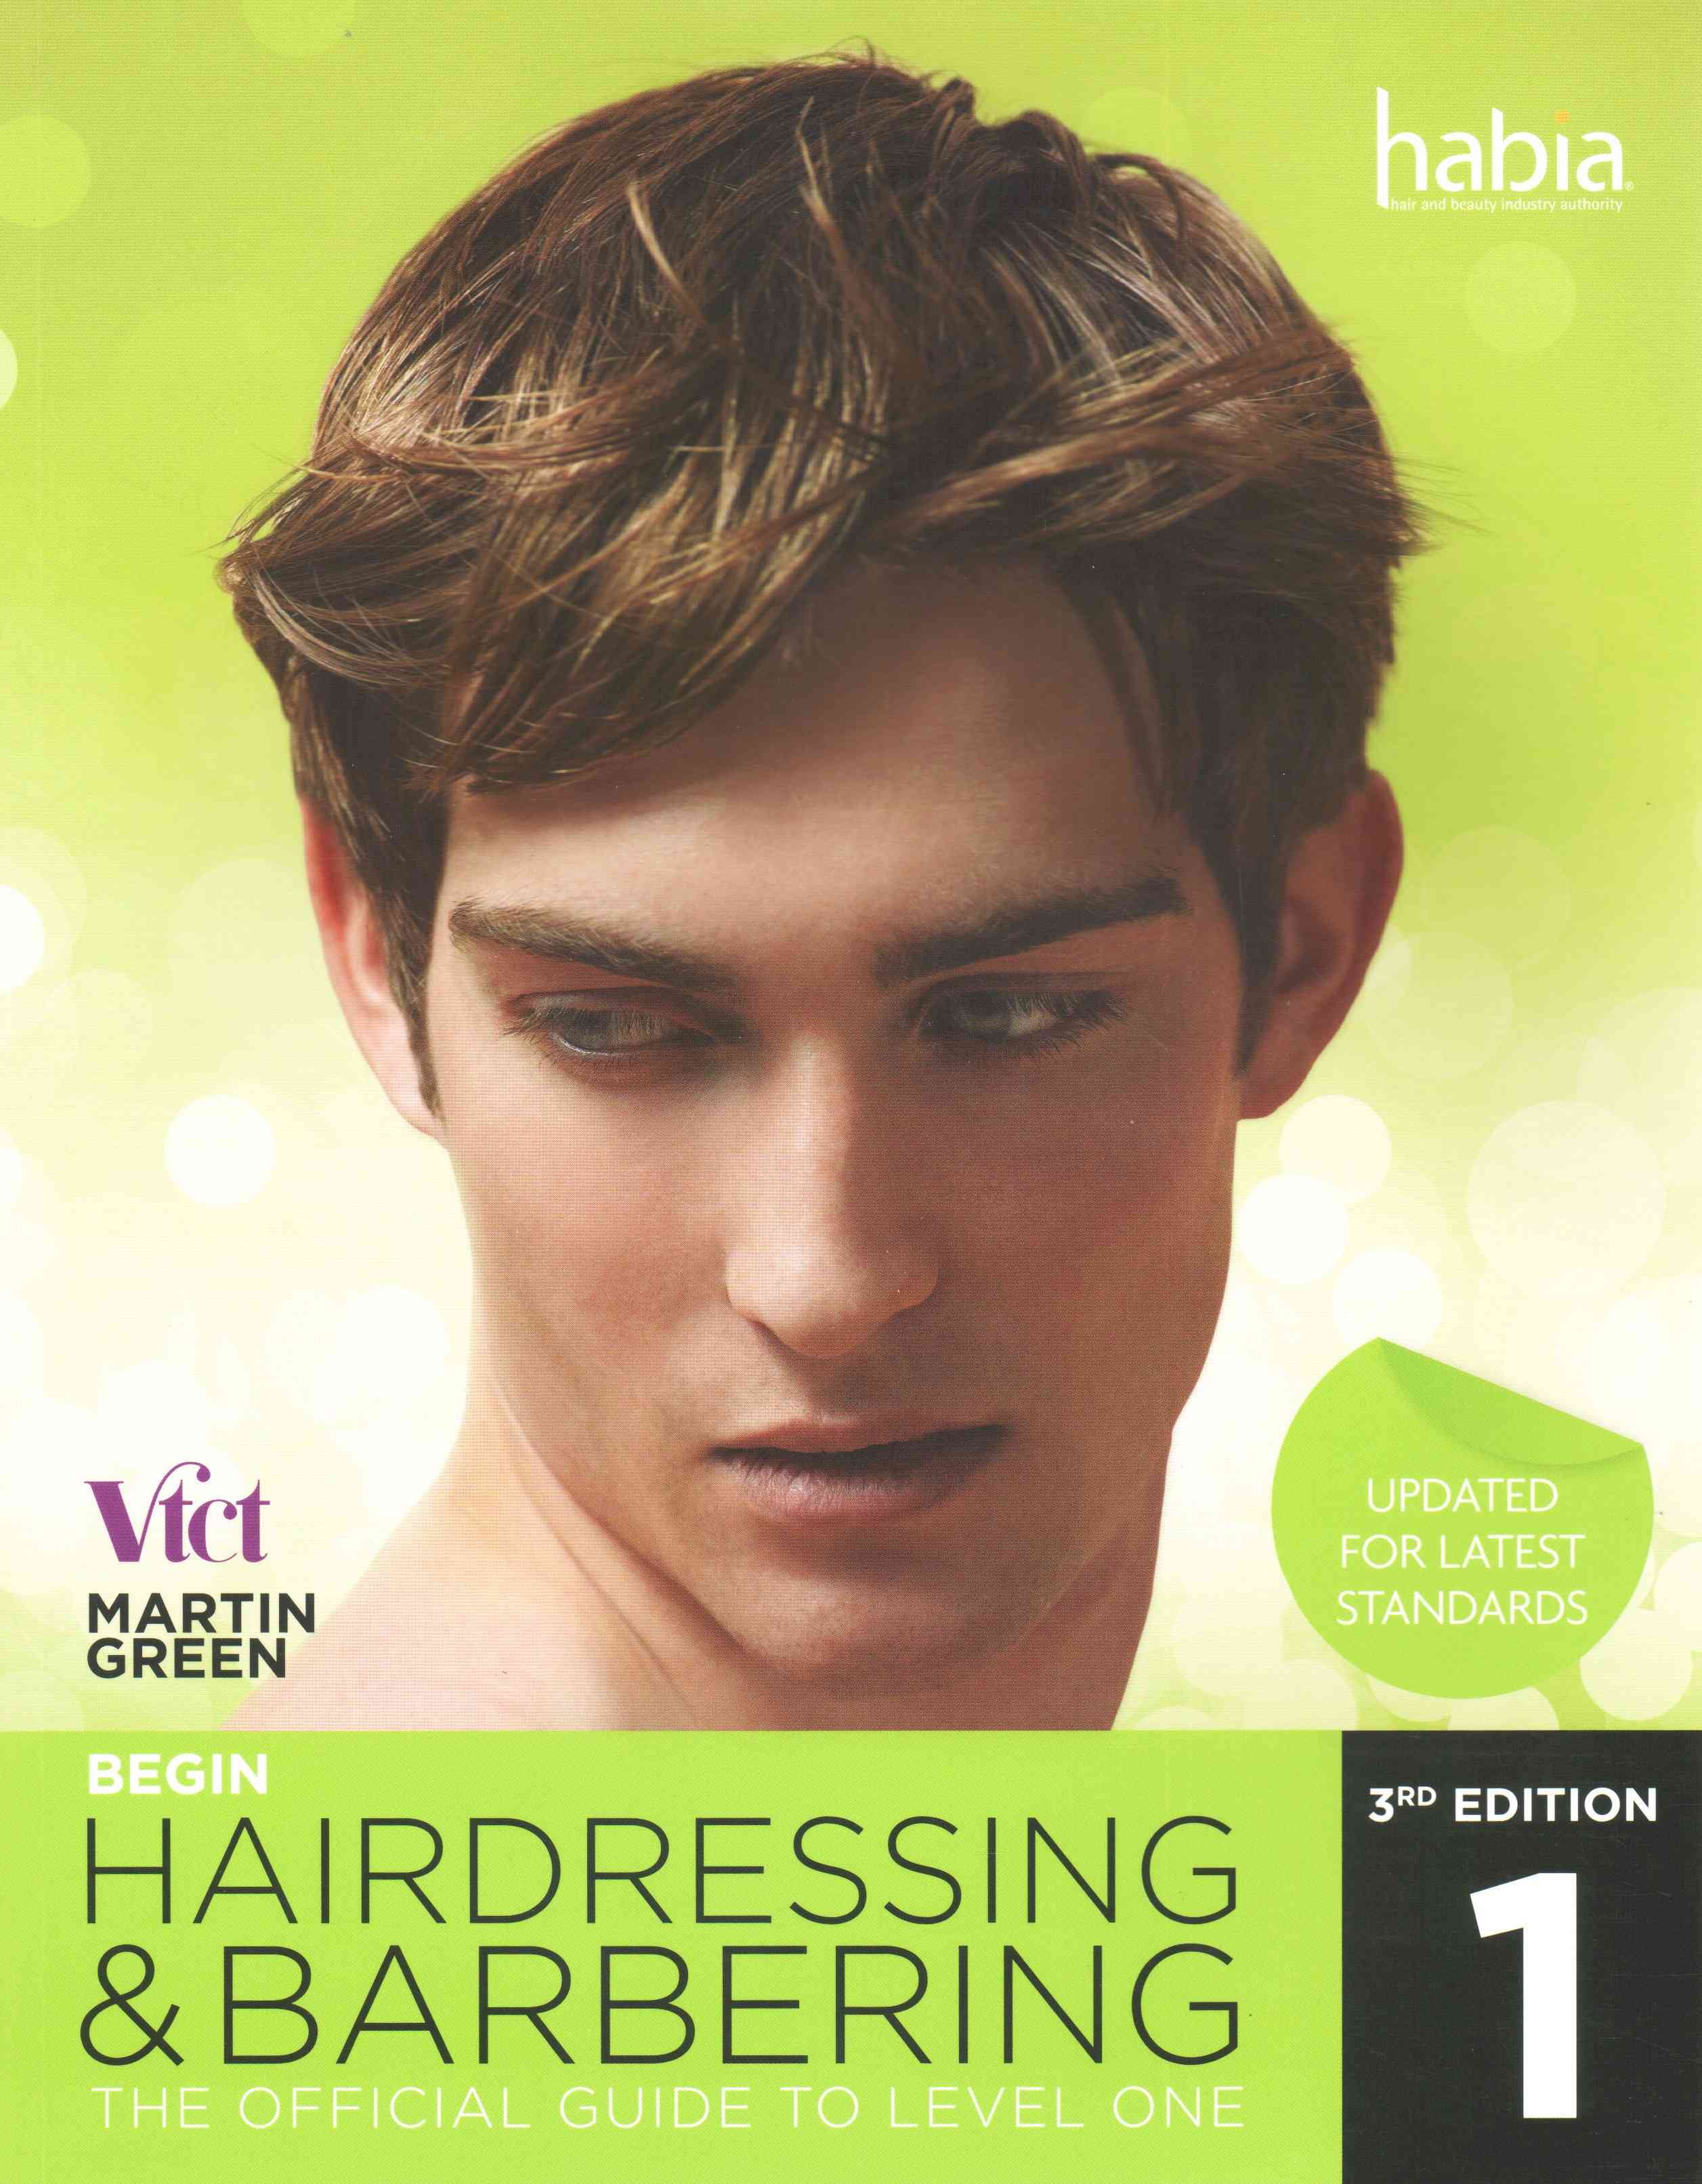 Begin hairdressing and Barbering 3rd edition by Martin Green